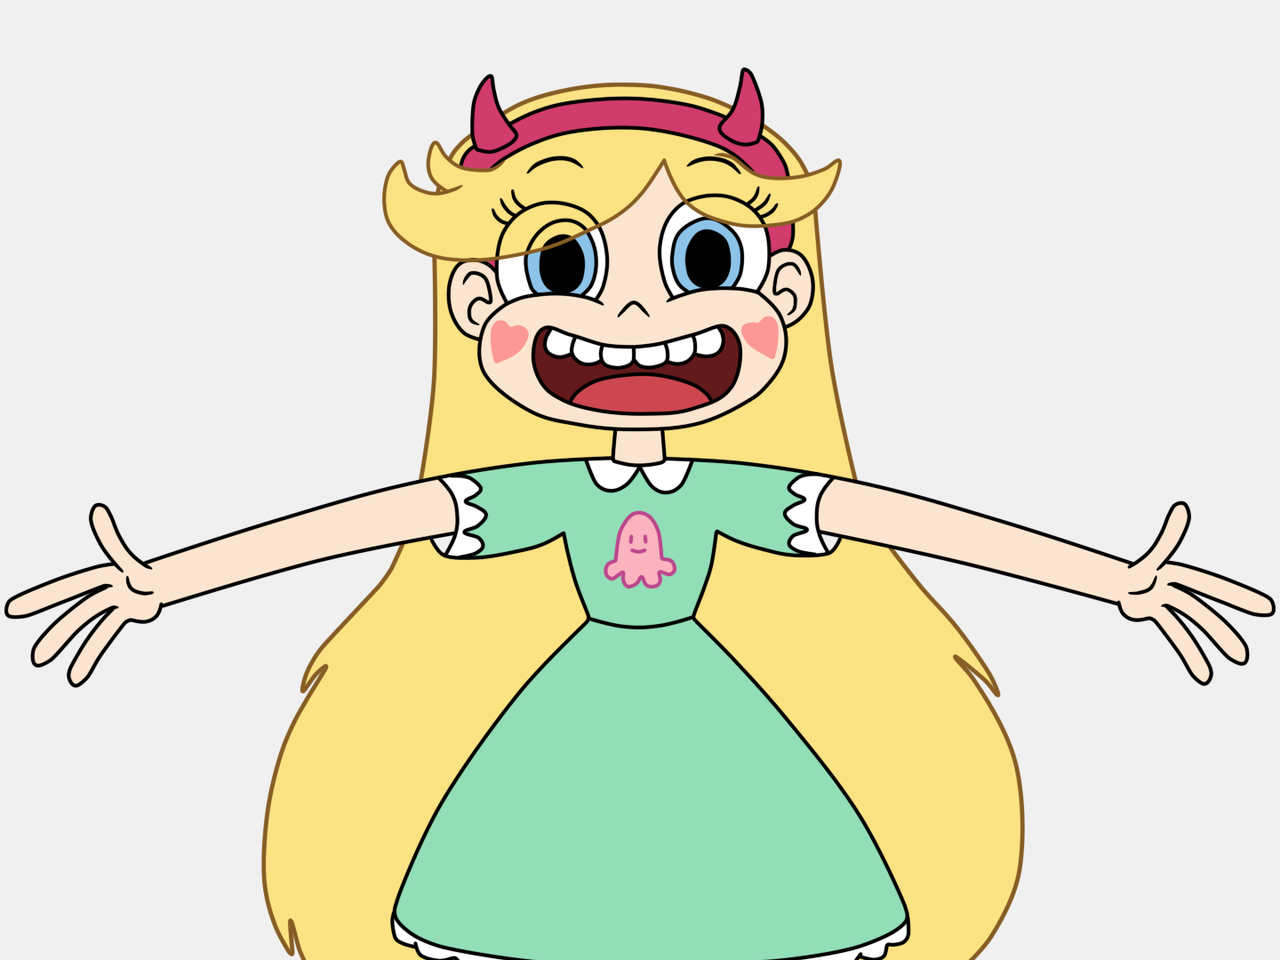 Star Vs The Forces of Evil.